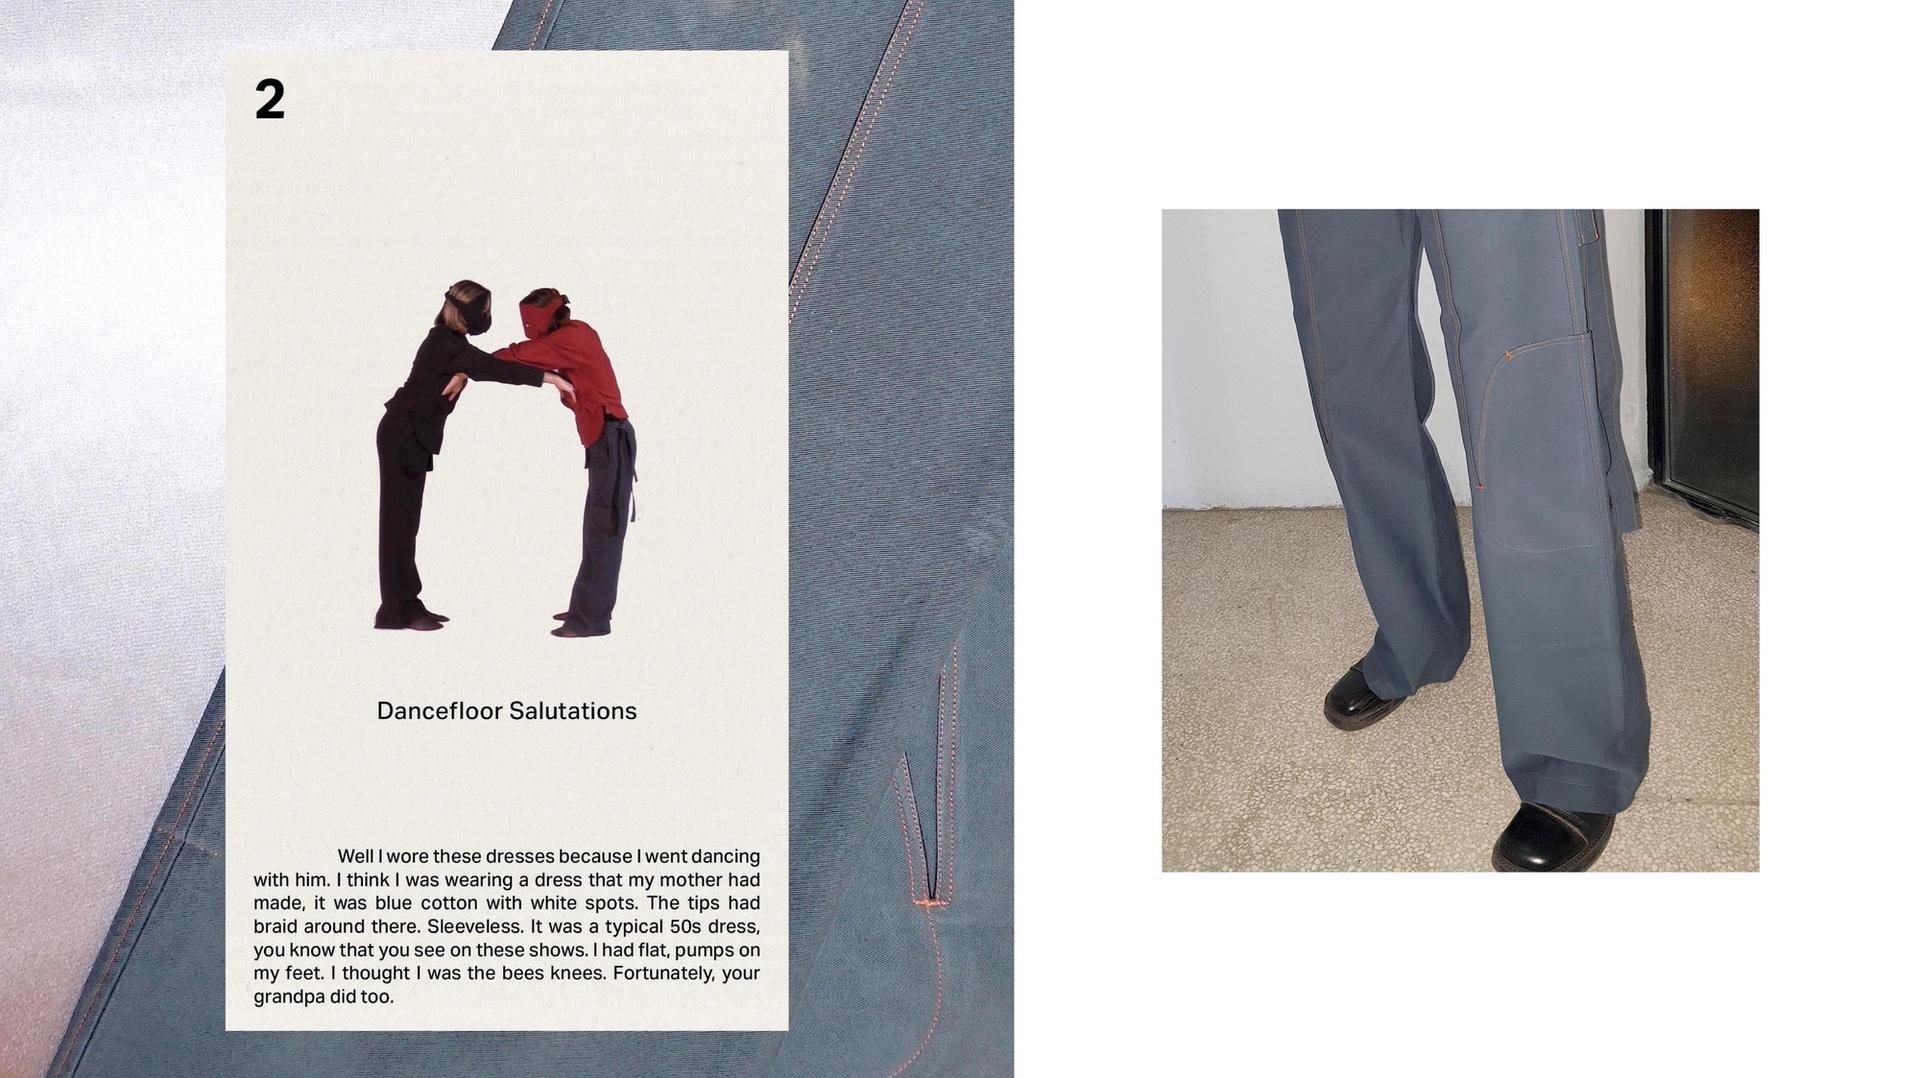 Photo montage of trousers and two people with eyemasks and intertwined arms, text below 'Dancefloor Salutations' and description of a woman's dress